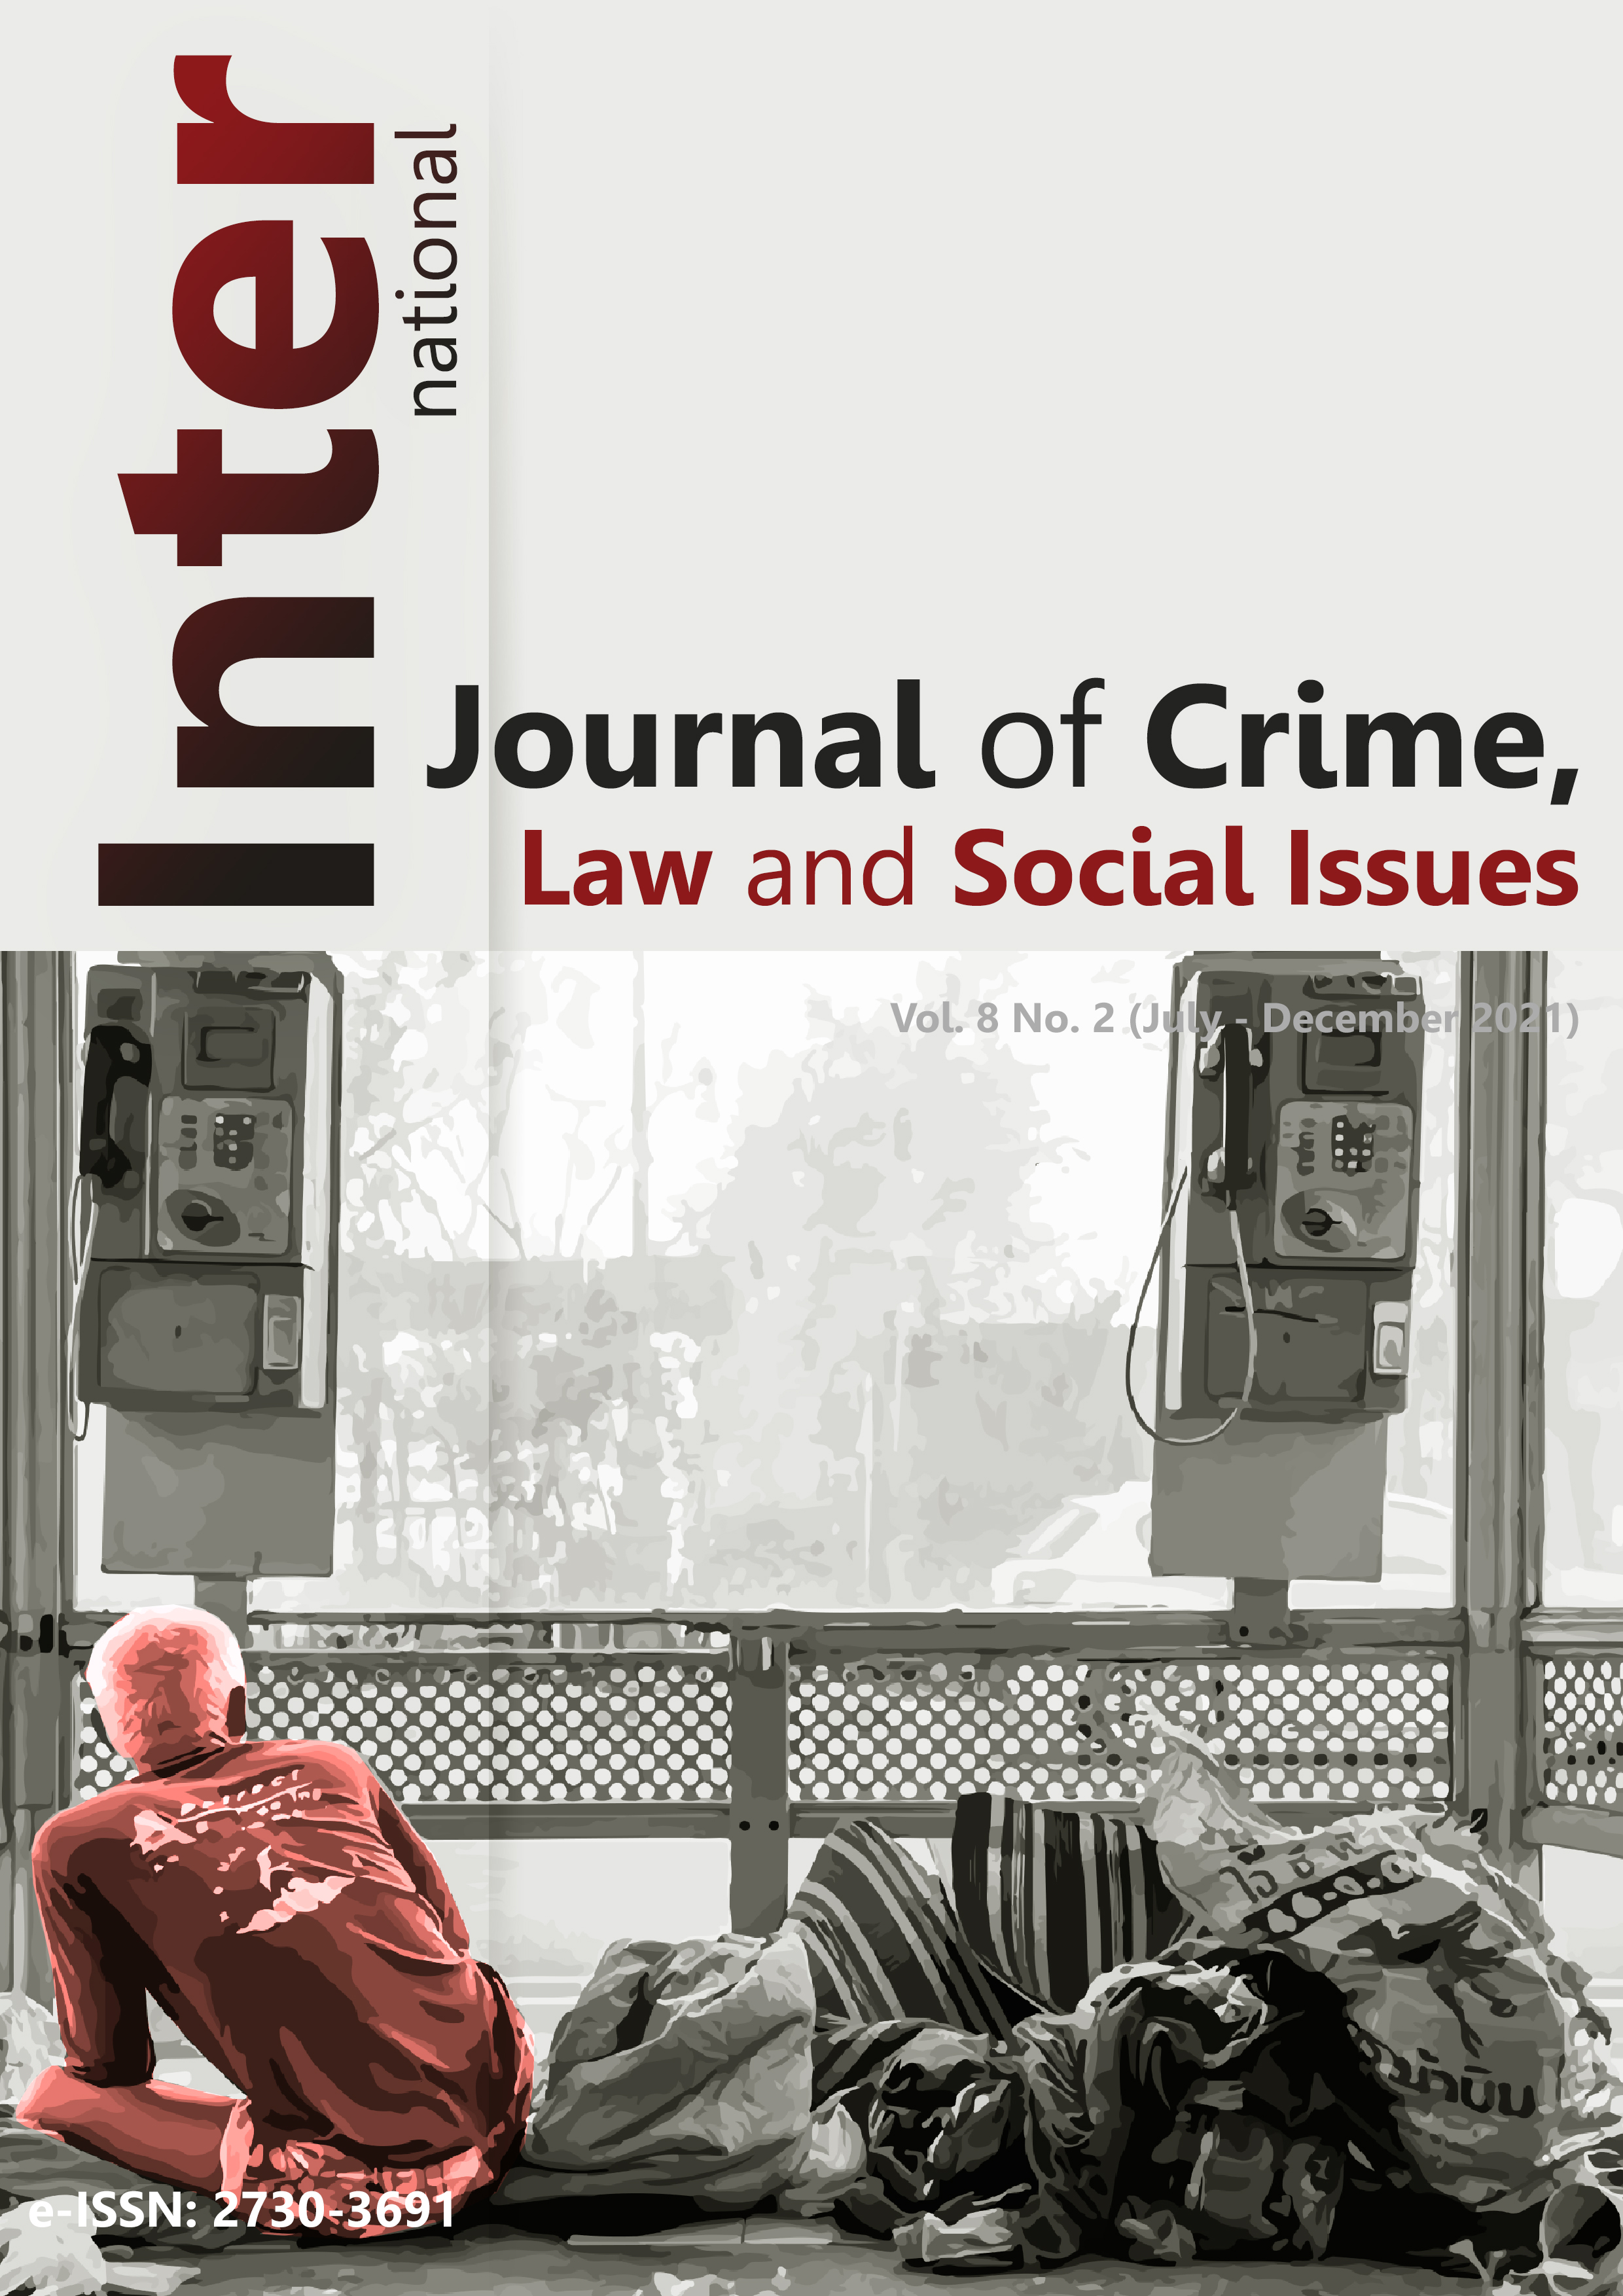 					View Vol. 8 No. 2 (2021): International Journal of Crime, Law and Social Issues
				